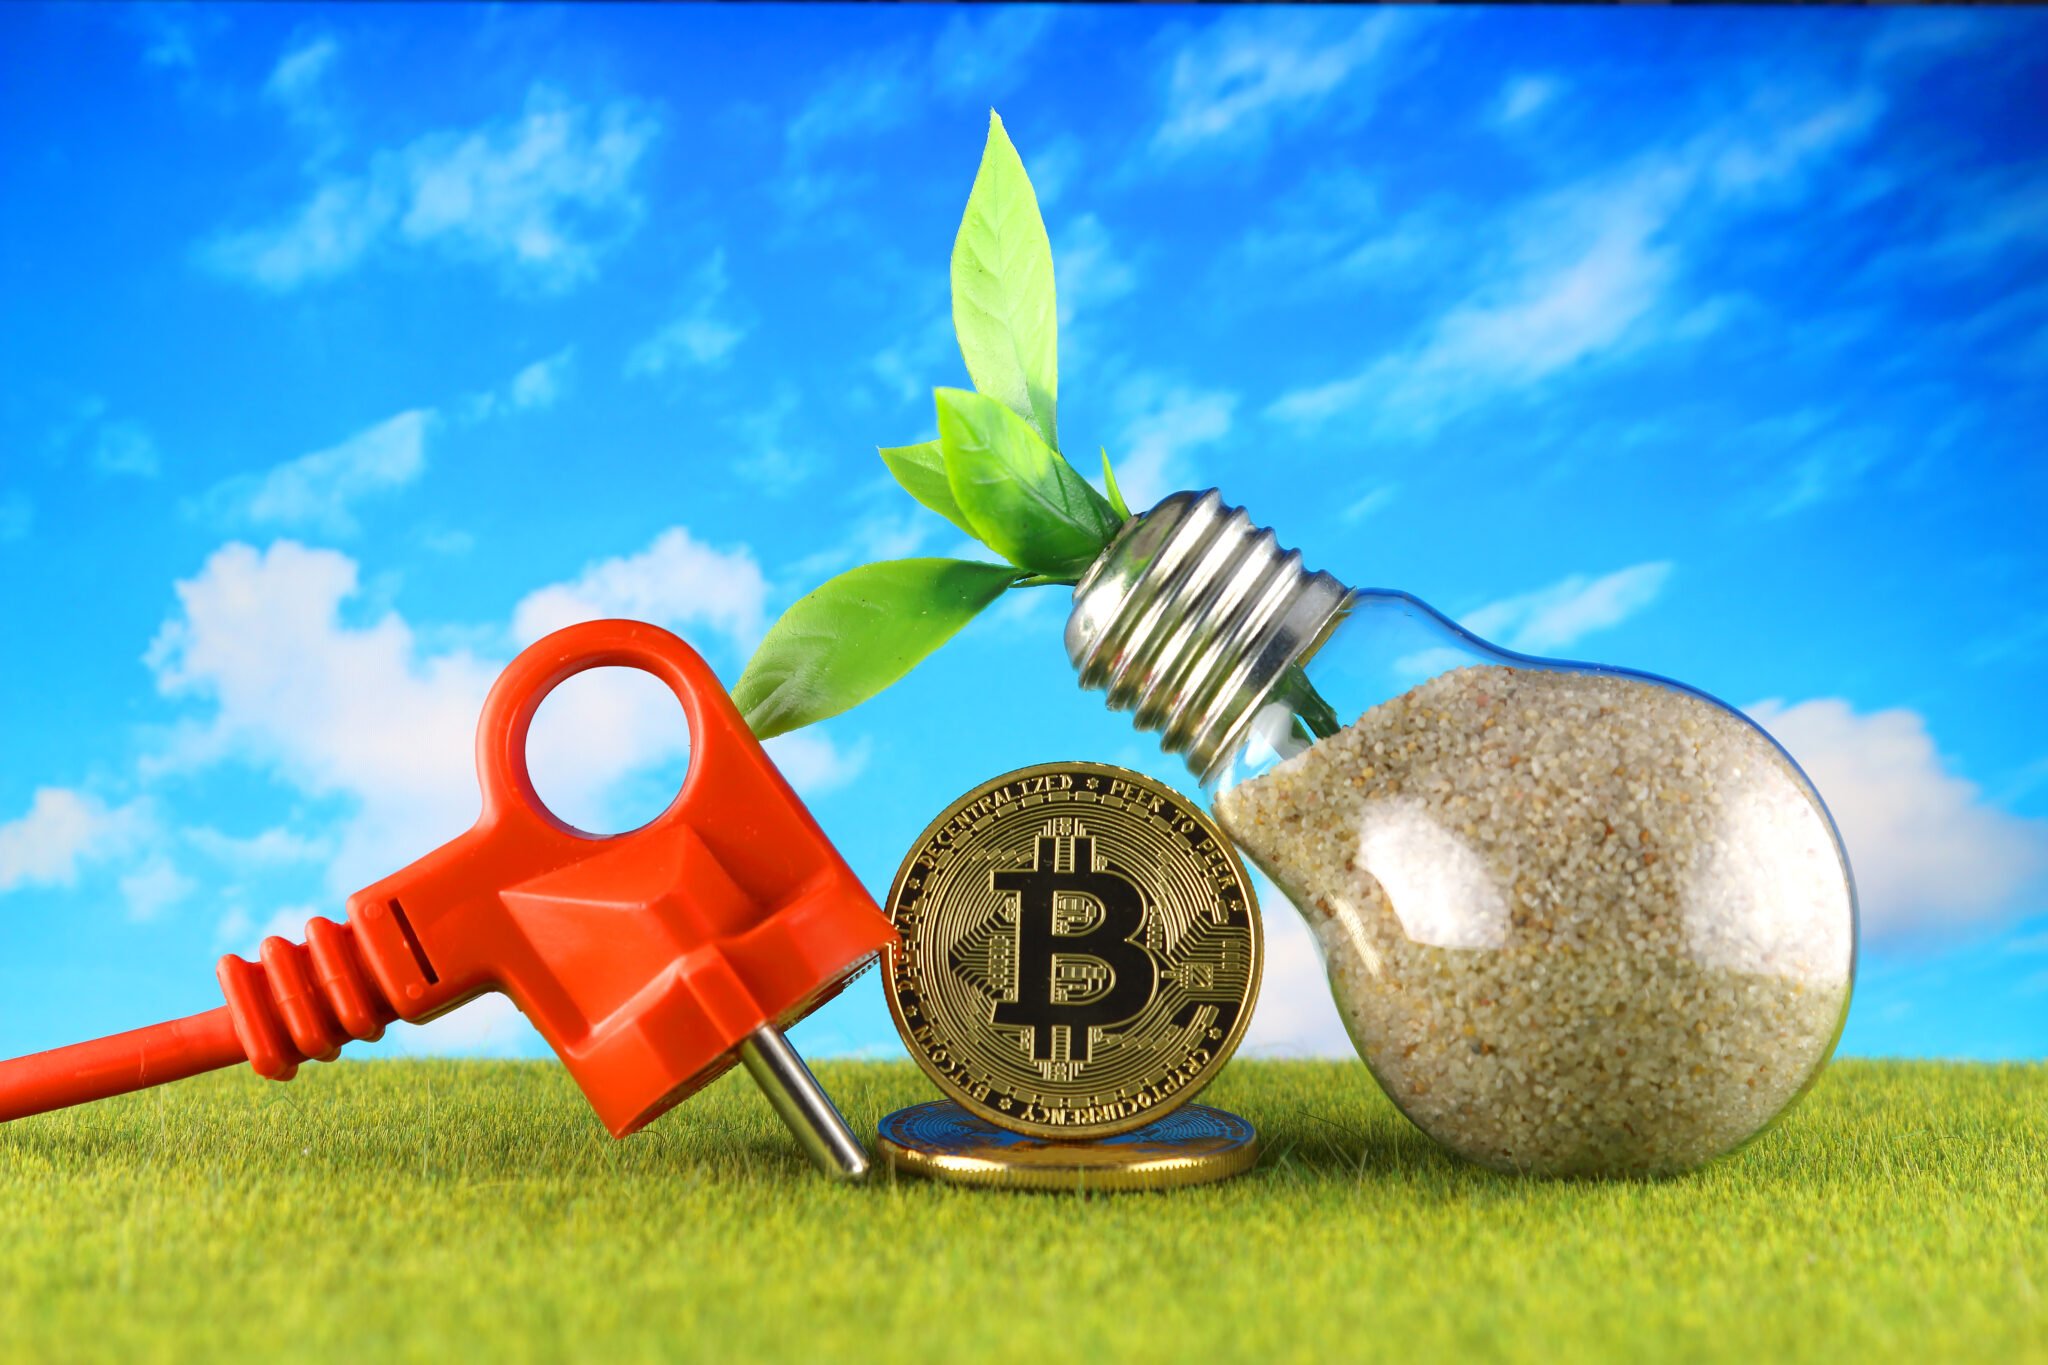 Bitcoin (BTC) and green, renewable energy concept. Electricity prices, energy saving in the cryptocurrency mining business.